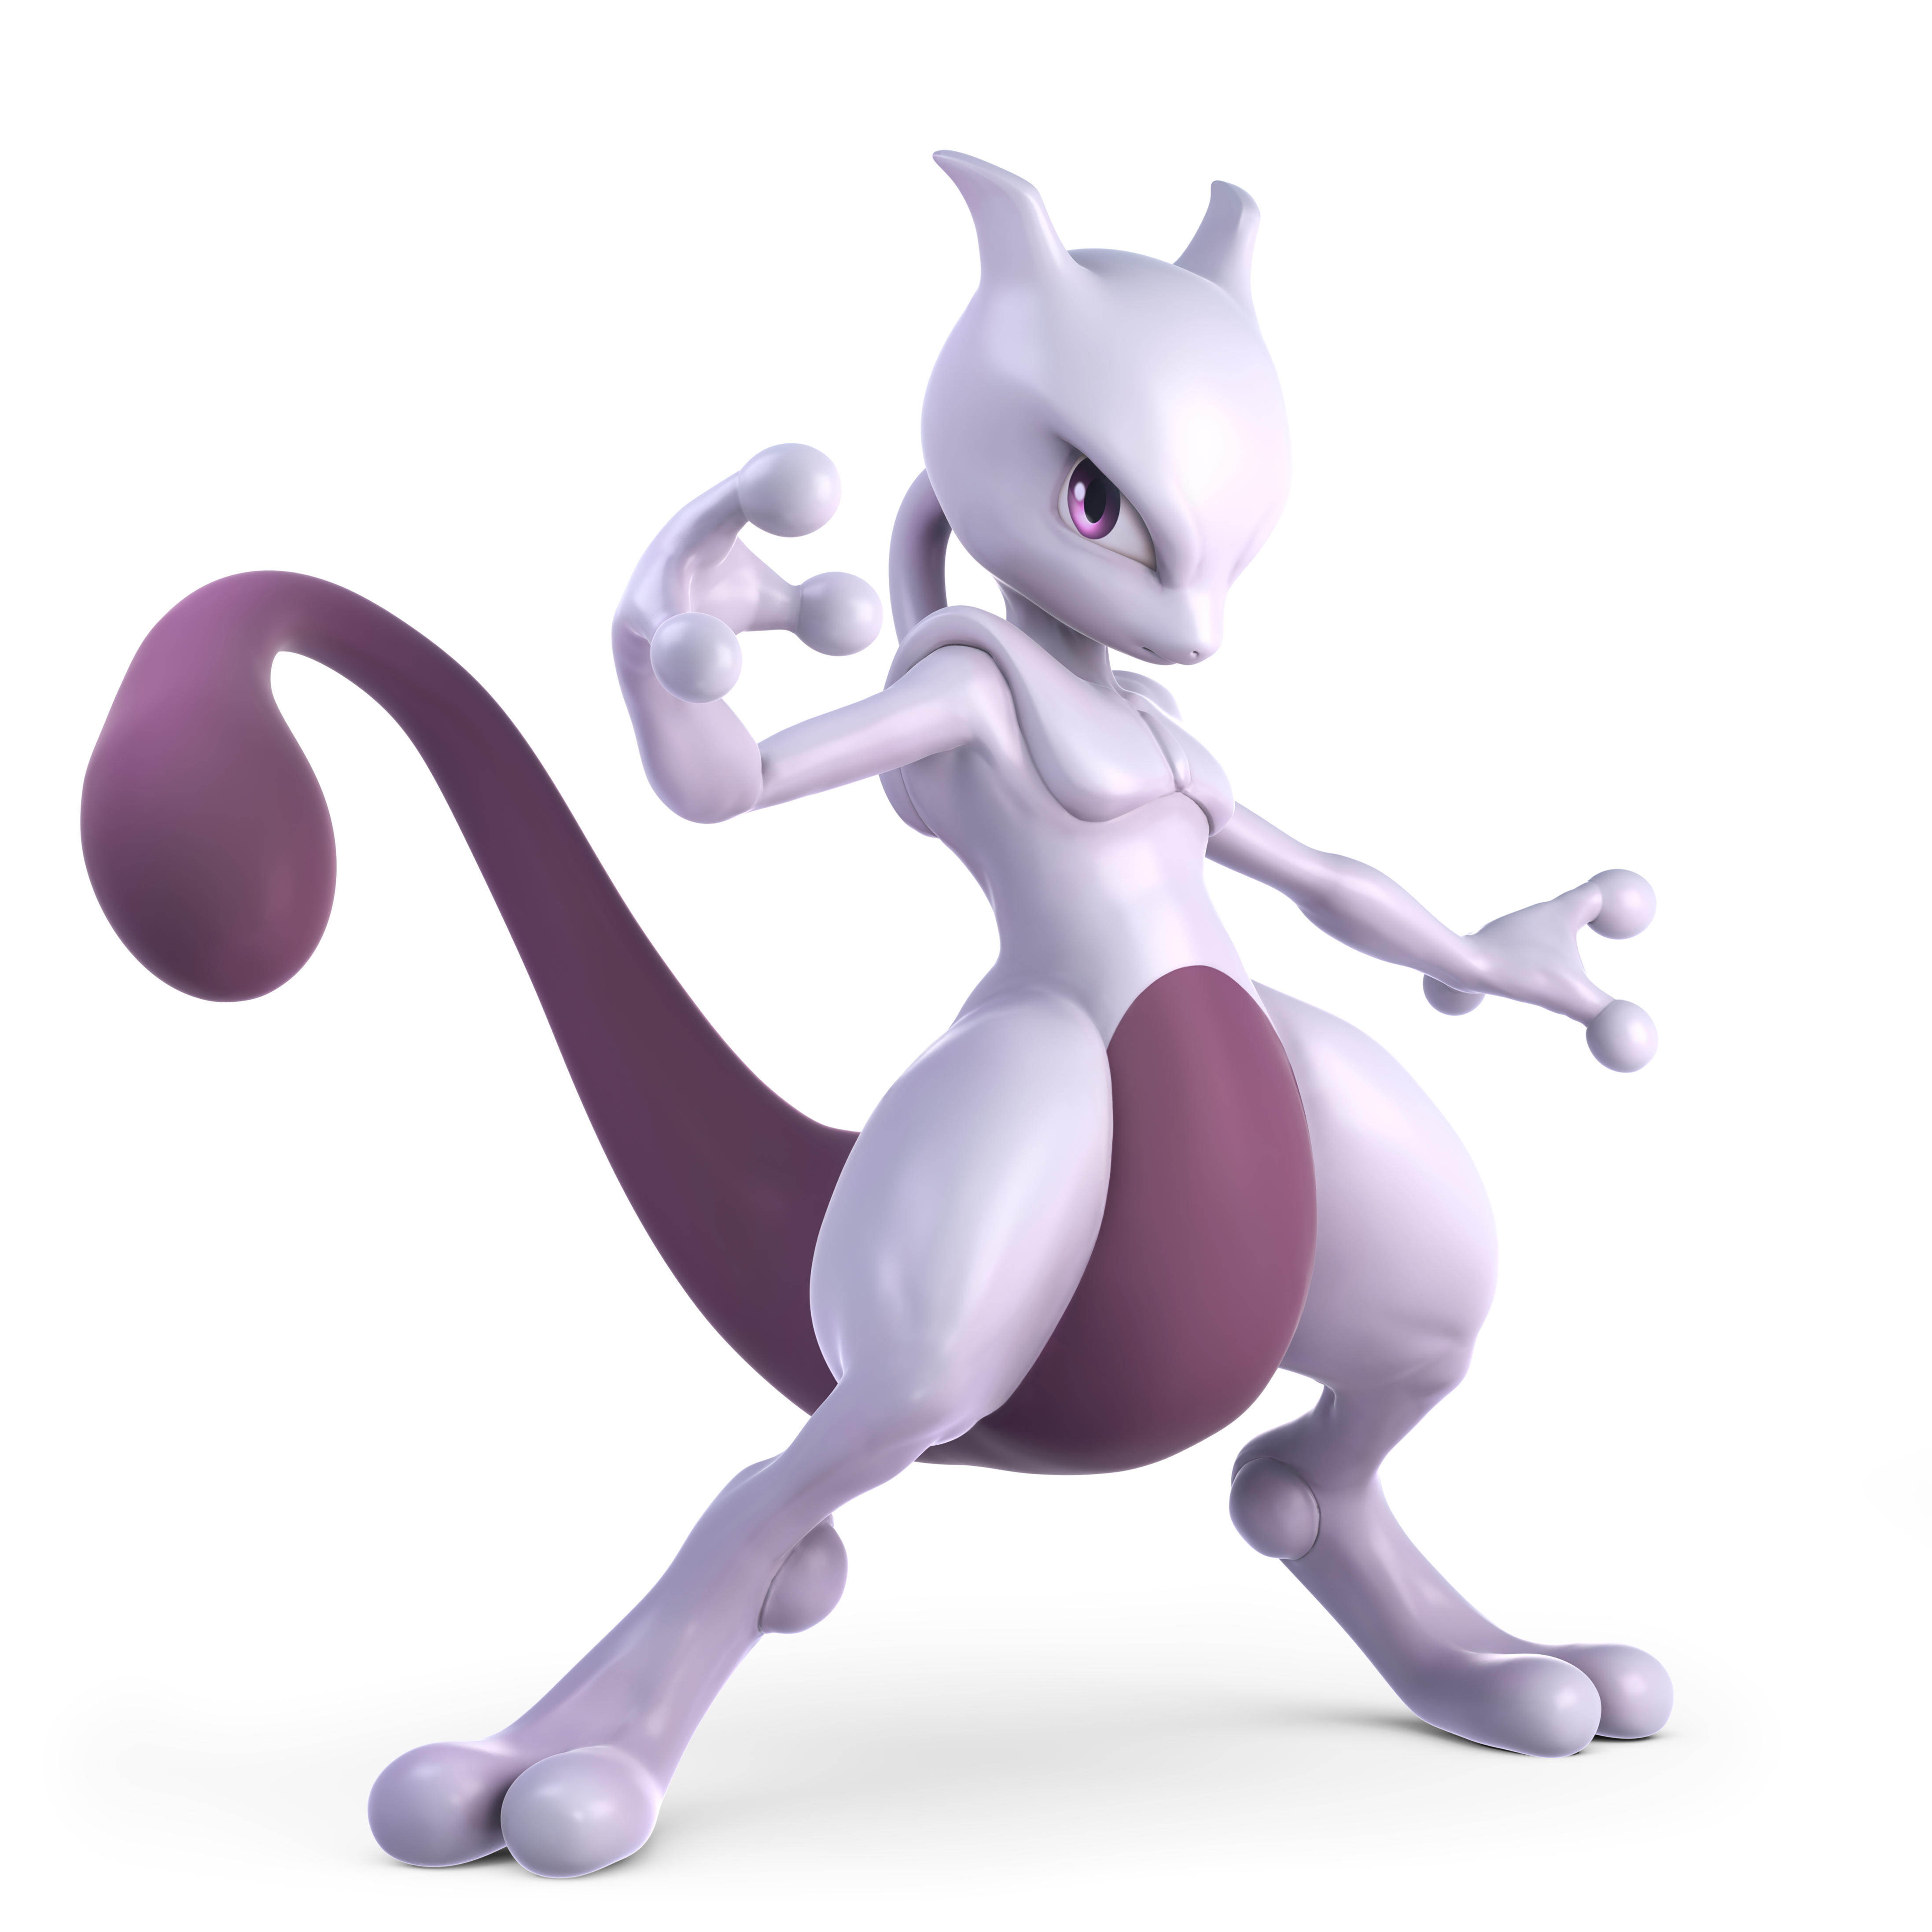 Mewtwo Png & Free Mewtwo.png Transparent Images #5953.